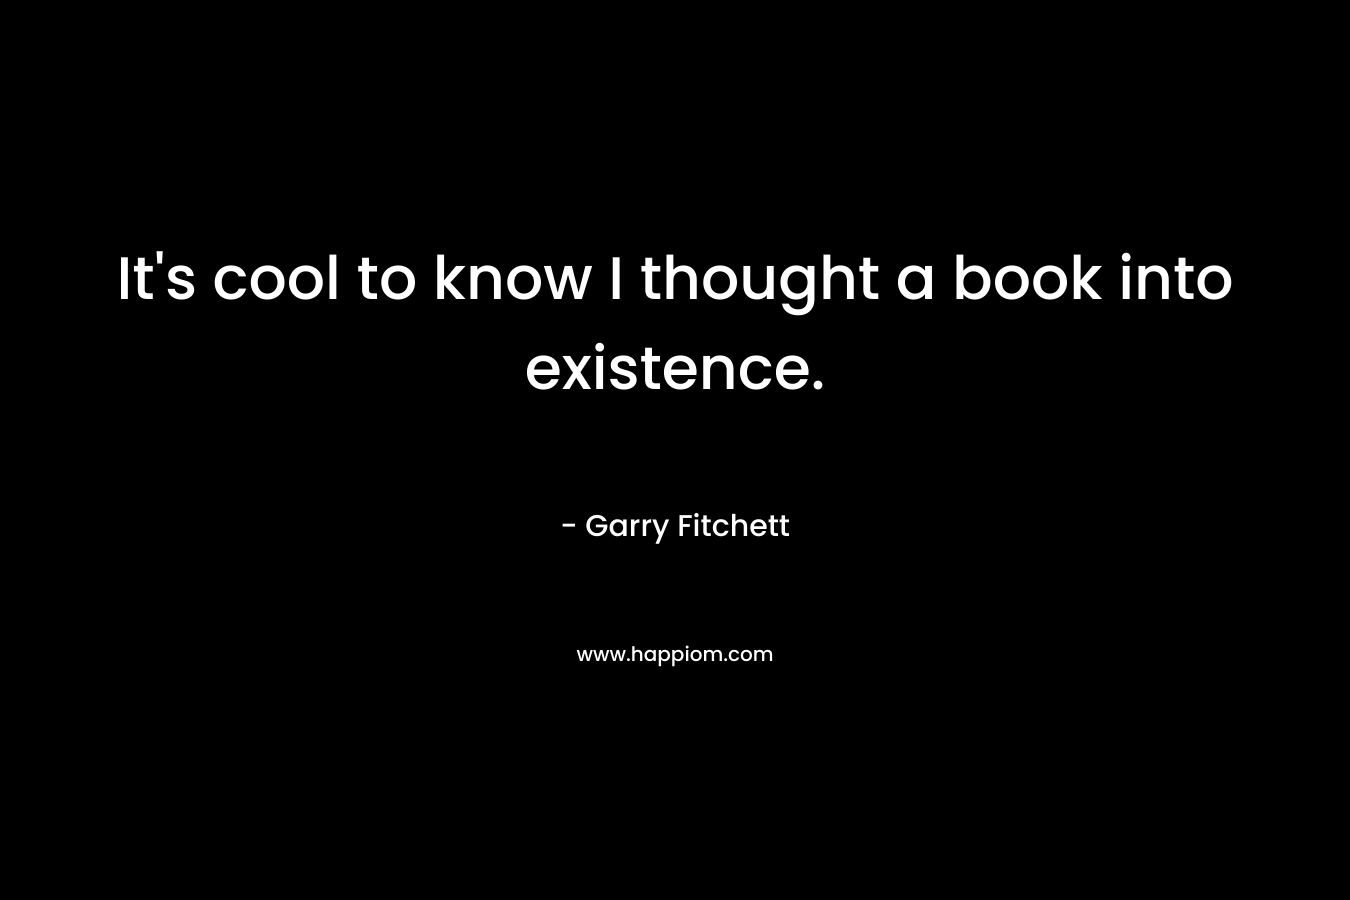 It’s cool to know I thought a book into existence. – Garry Fitchett